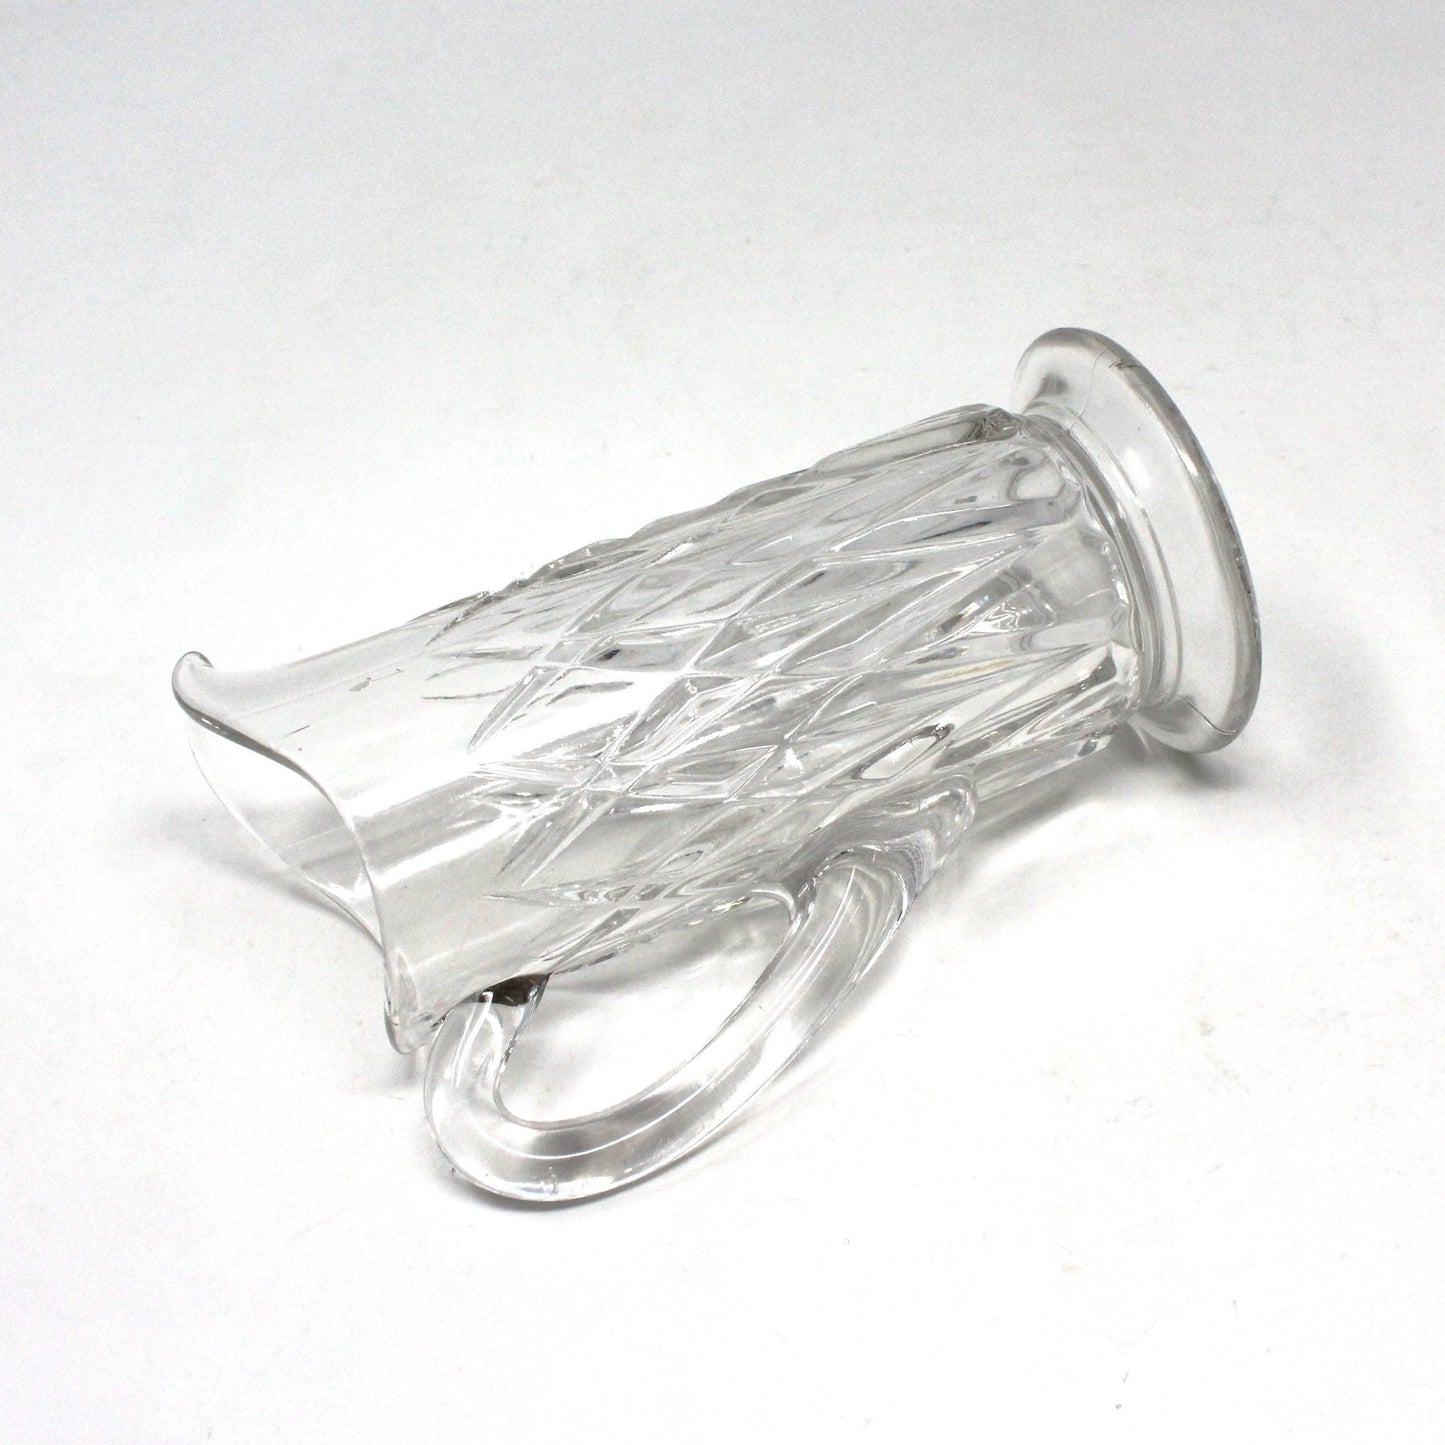 Pitcher, Small Cut Glass Pitcher, Arches, Vintage